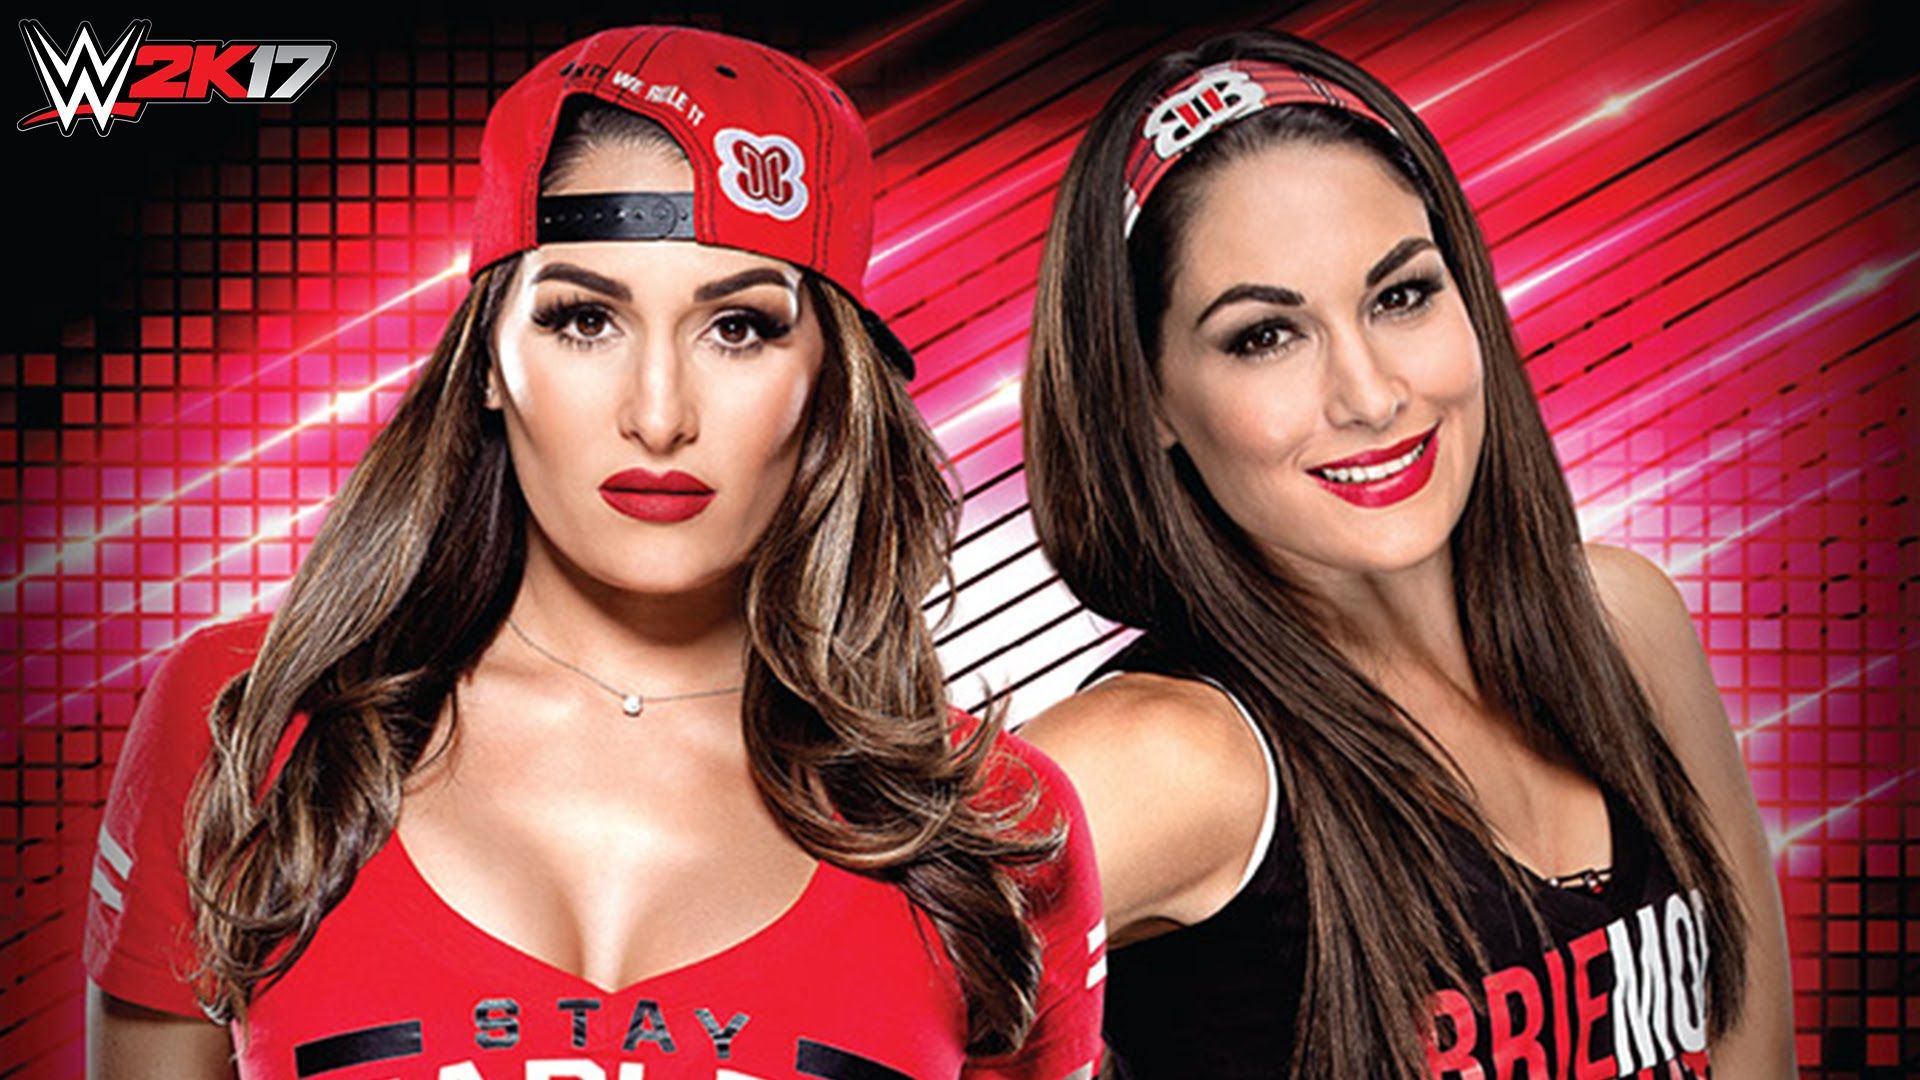 Free download The Bella Twins Wallpaper and Background Image